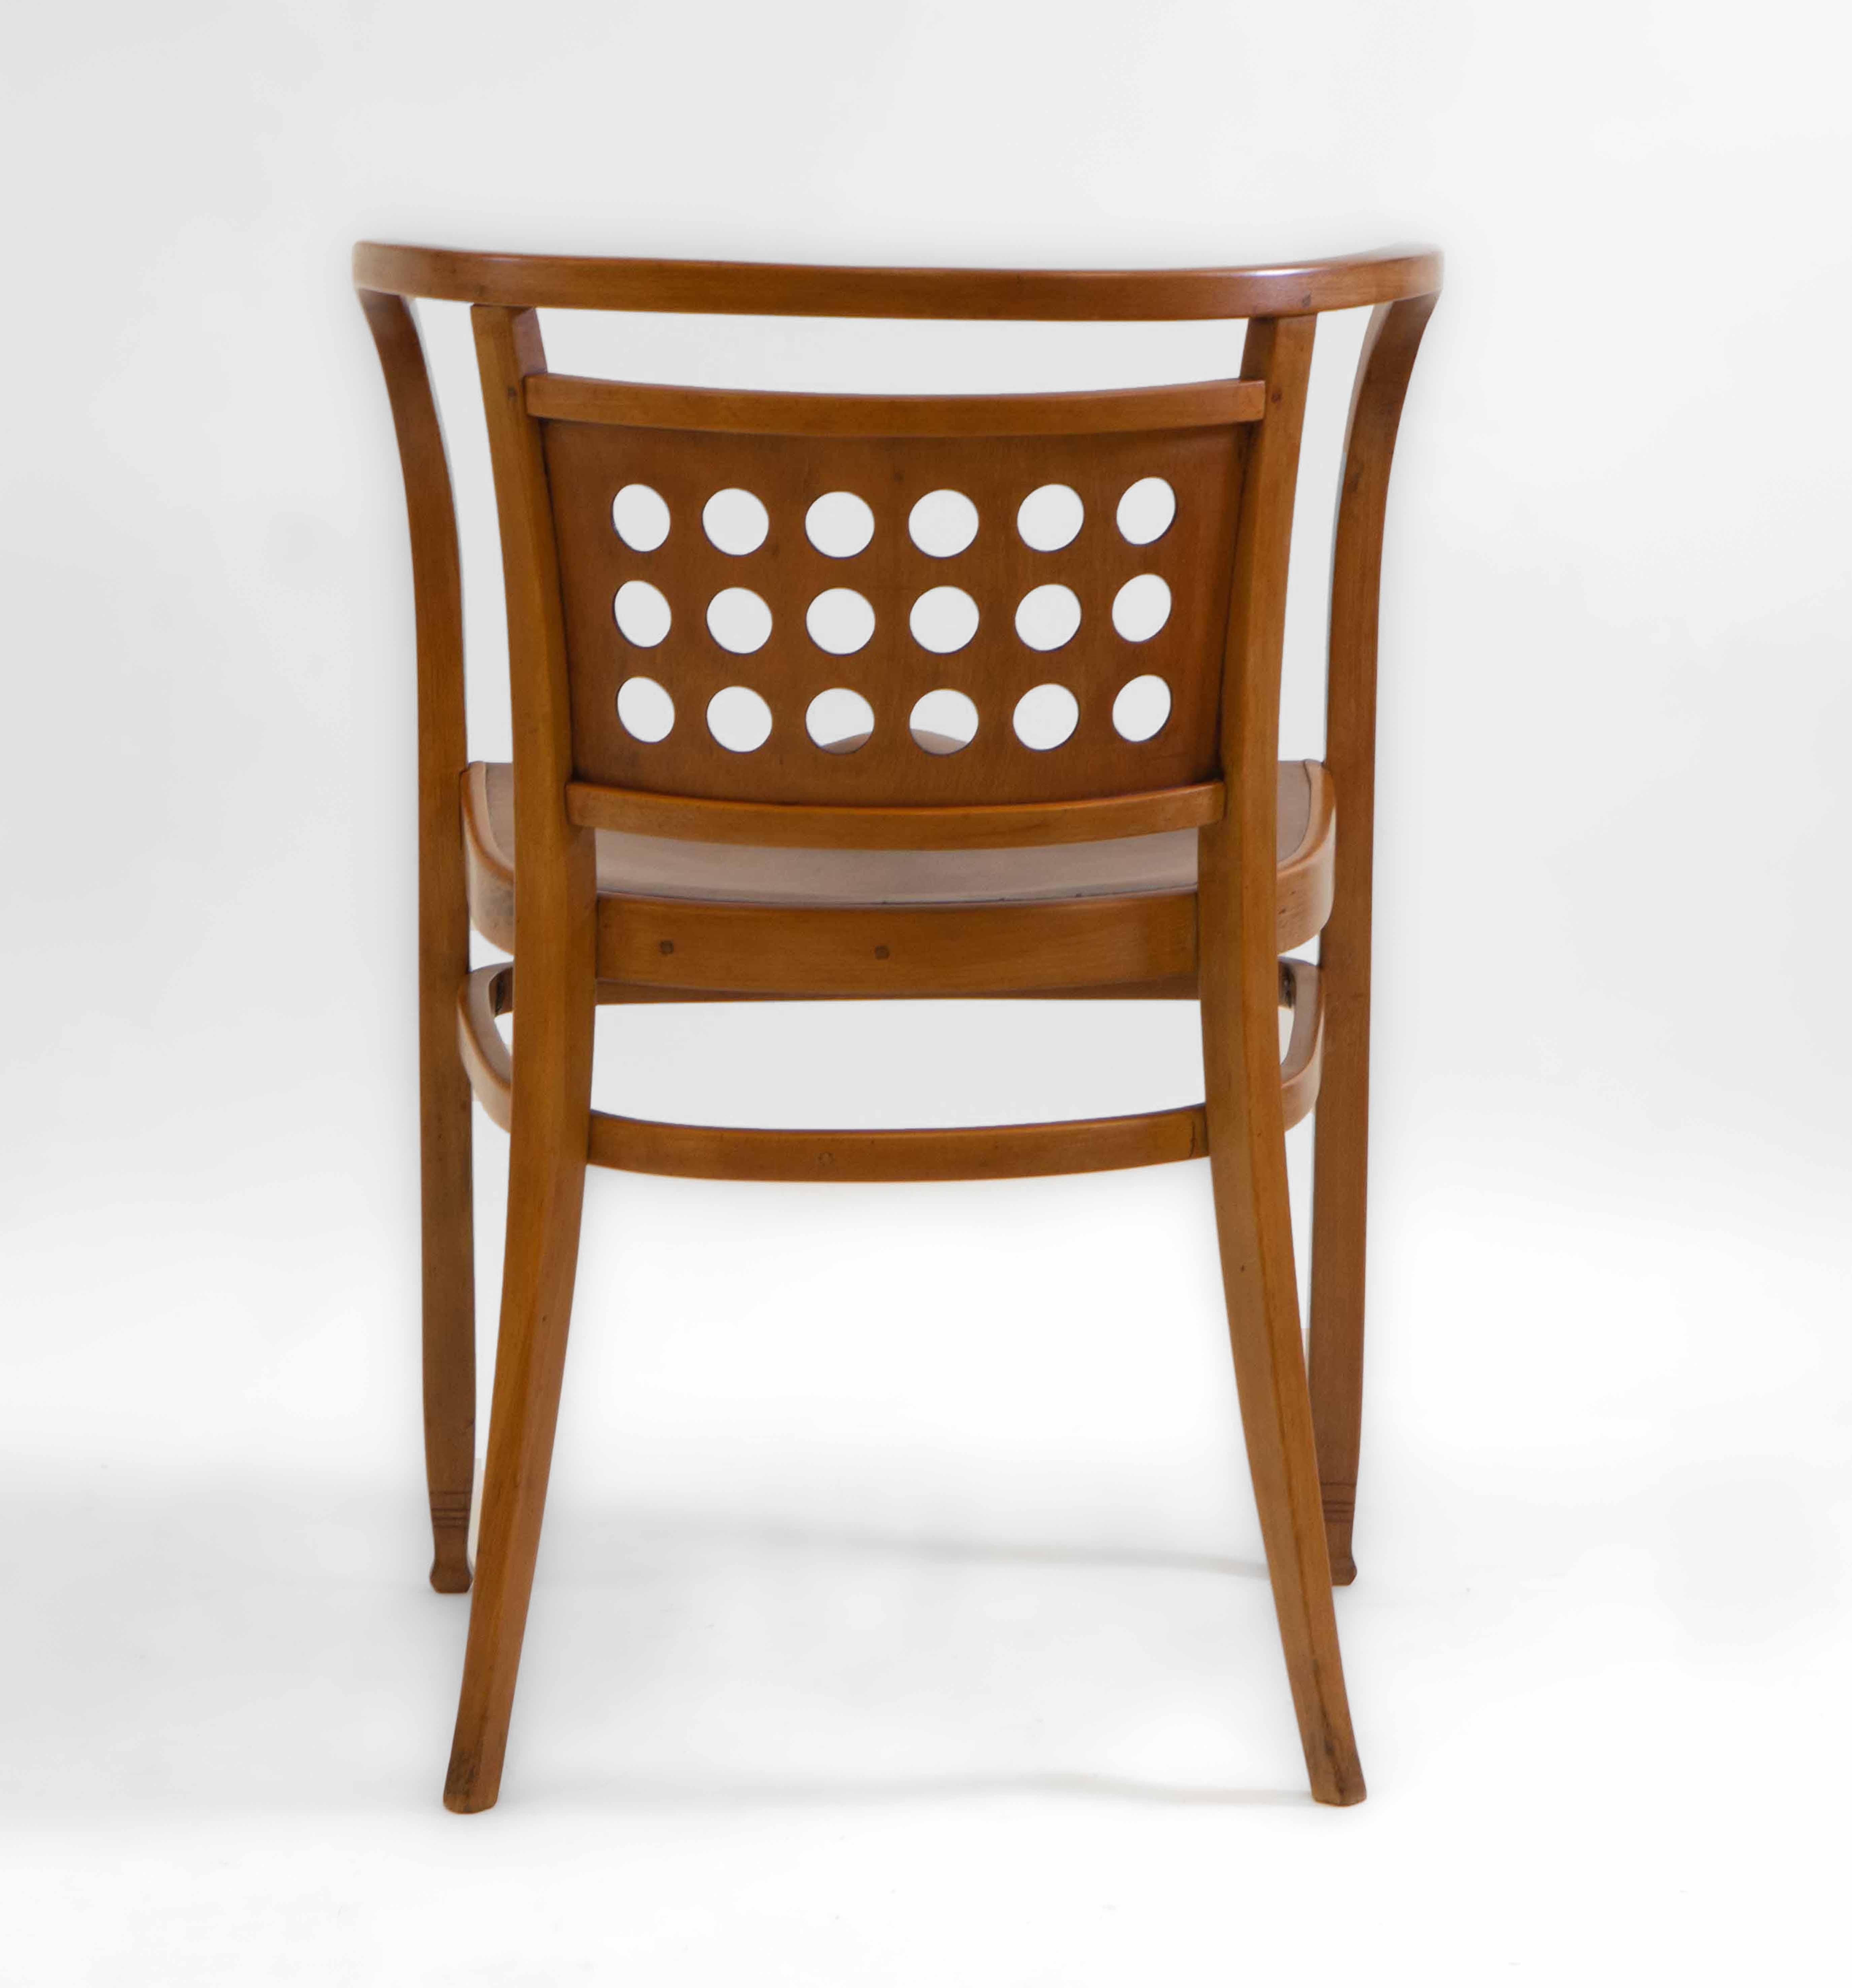 Beech Vienna Secessionist Bentwood Armchair Designed By Otto Wagner